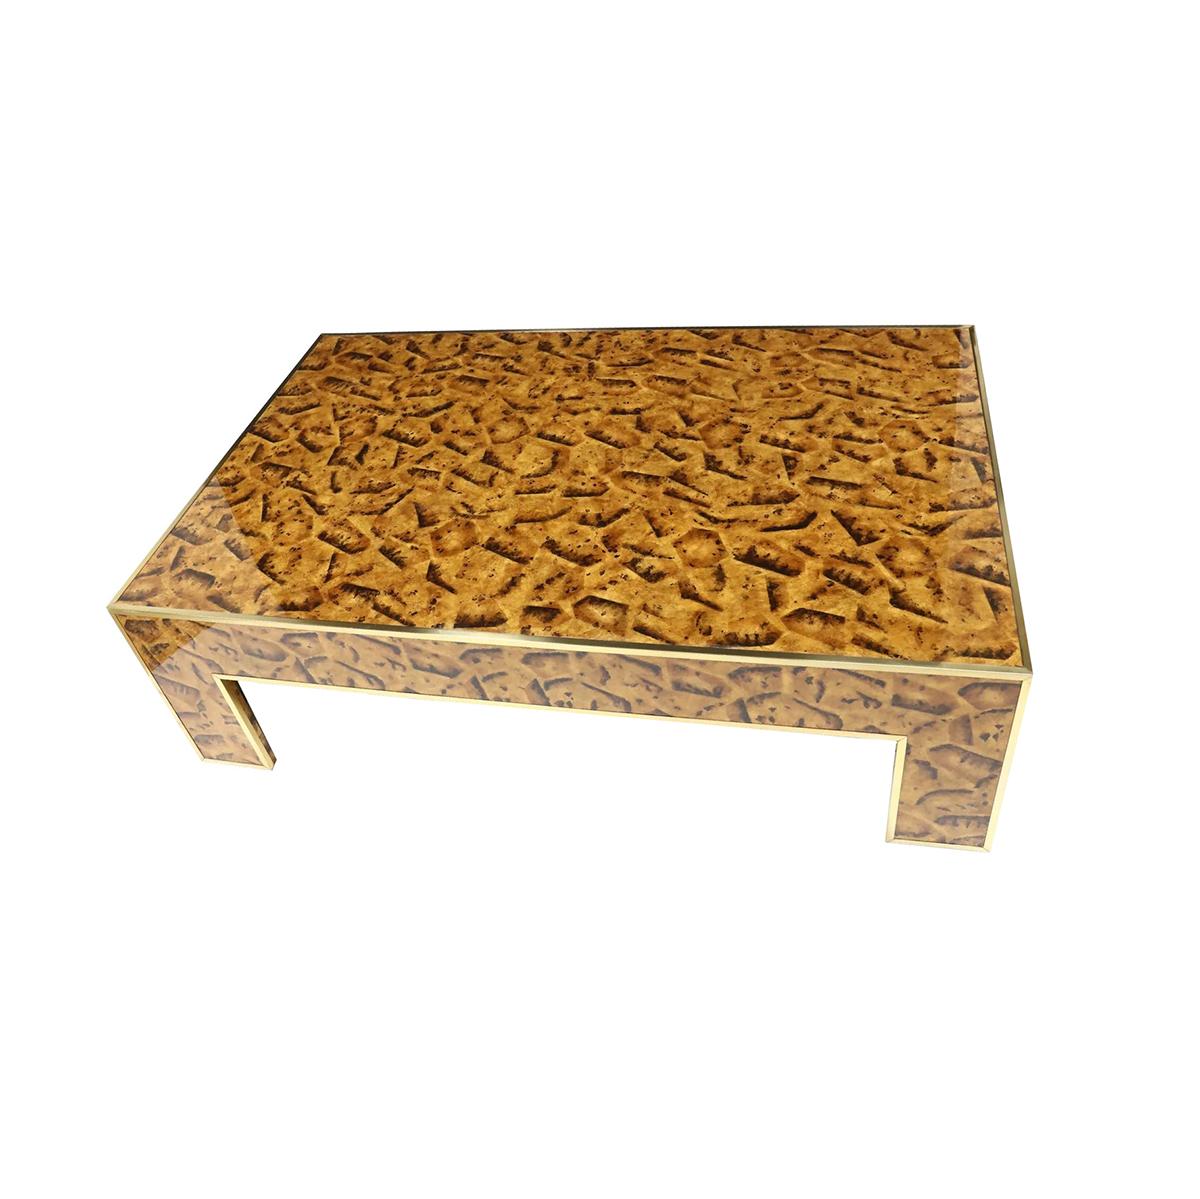 A modern style cocktail table with a hand-painted faux tortoise pen shell decoration. Framed with brass trim to all outside edges raised on short legs.

Dimensions: 54